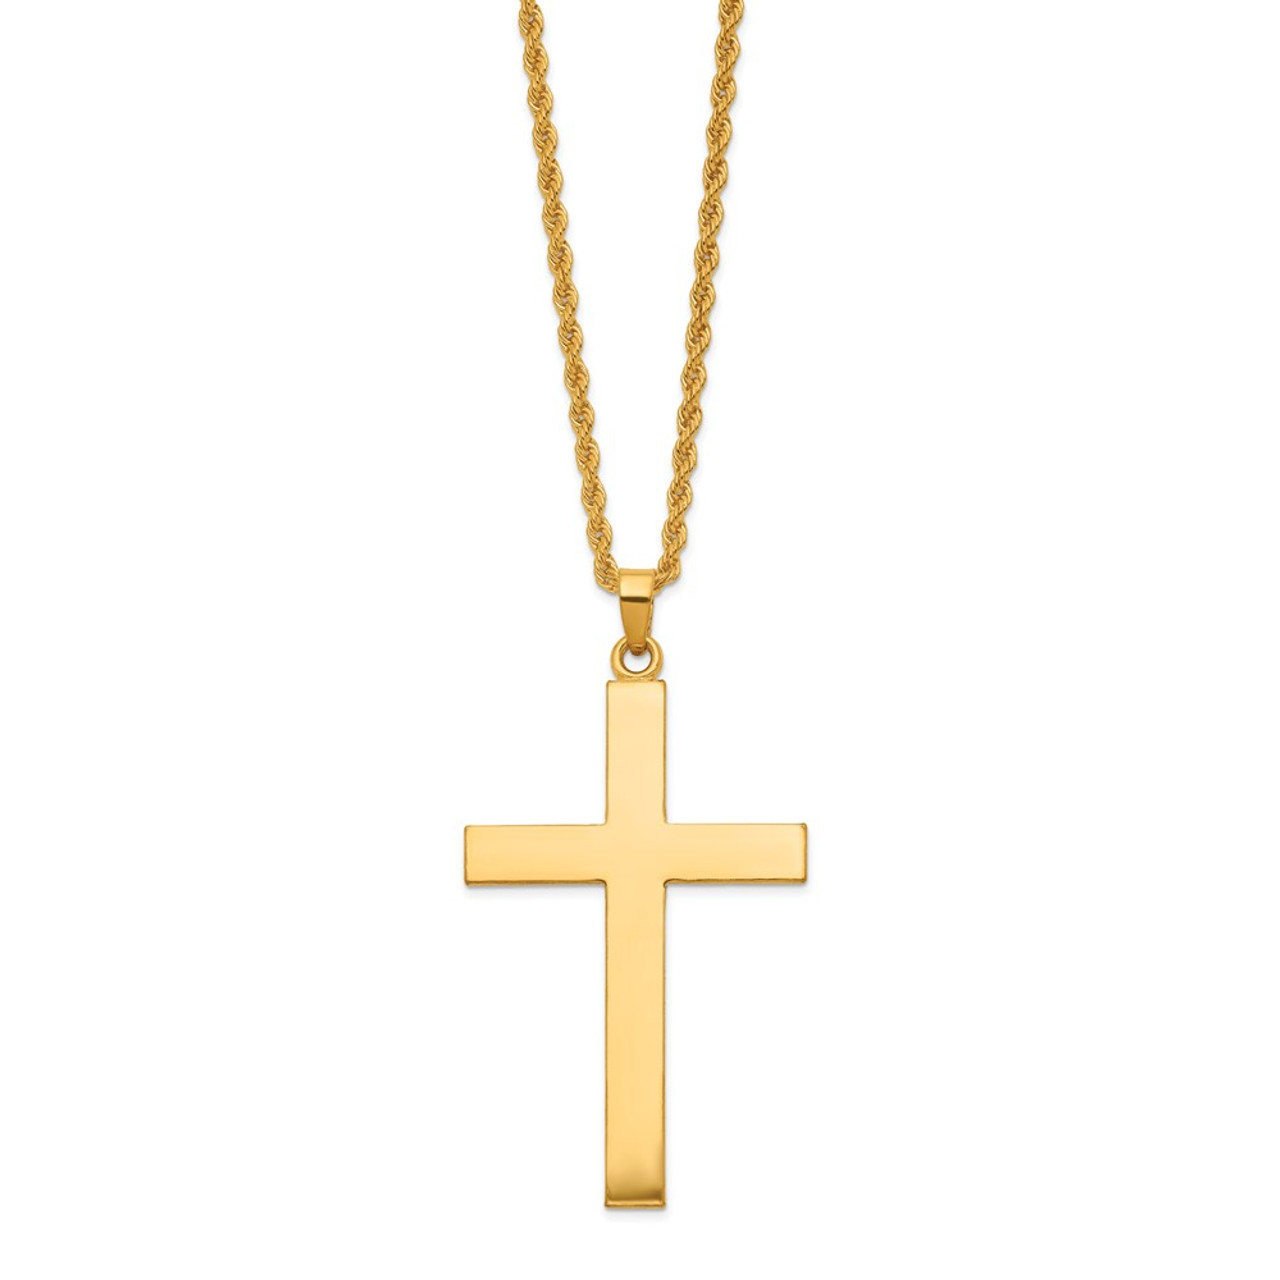 LIFETIME JEWELRY Small Cross inside Heart Necklace for Women & Men 24k Real  Gold Plated : Clothing, Shoes & Jewelry - Amazon.com